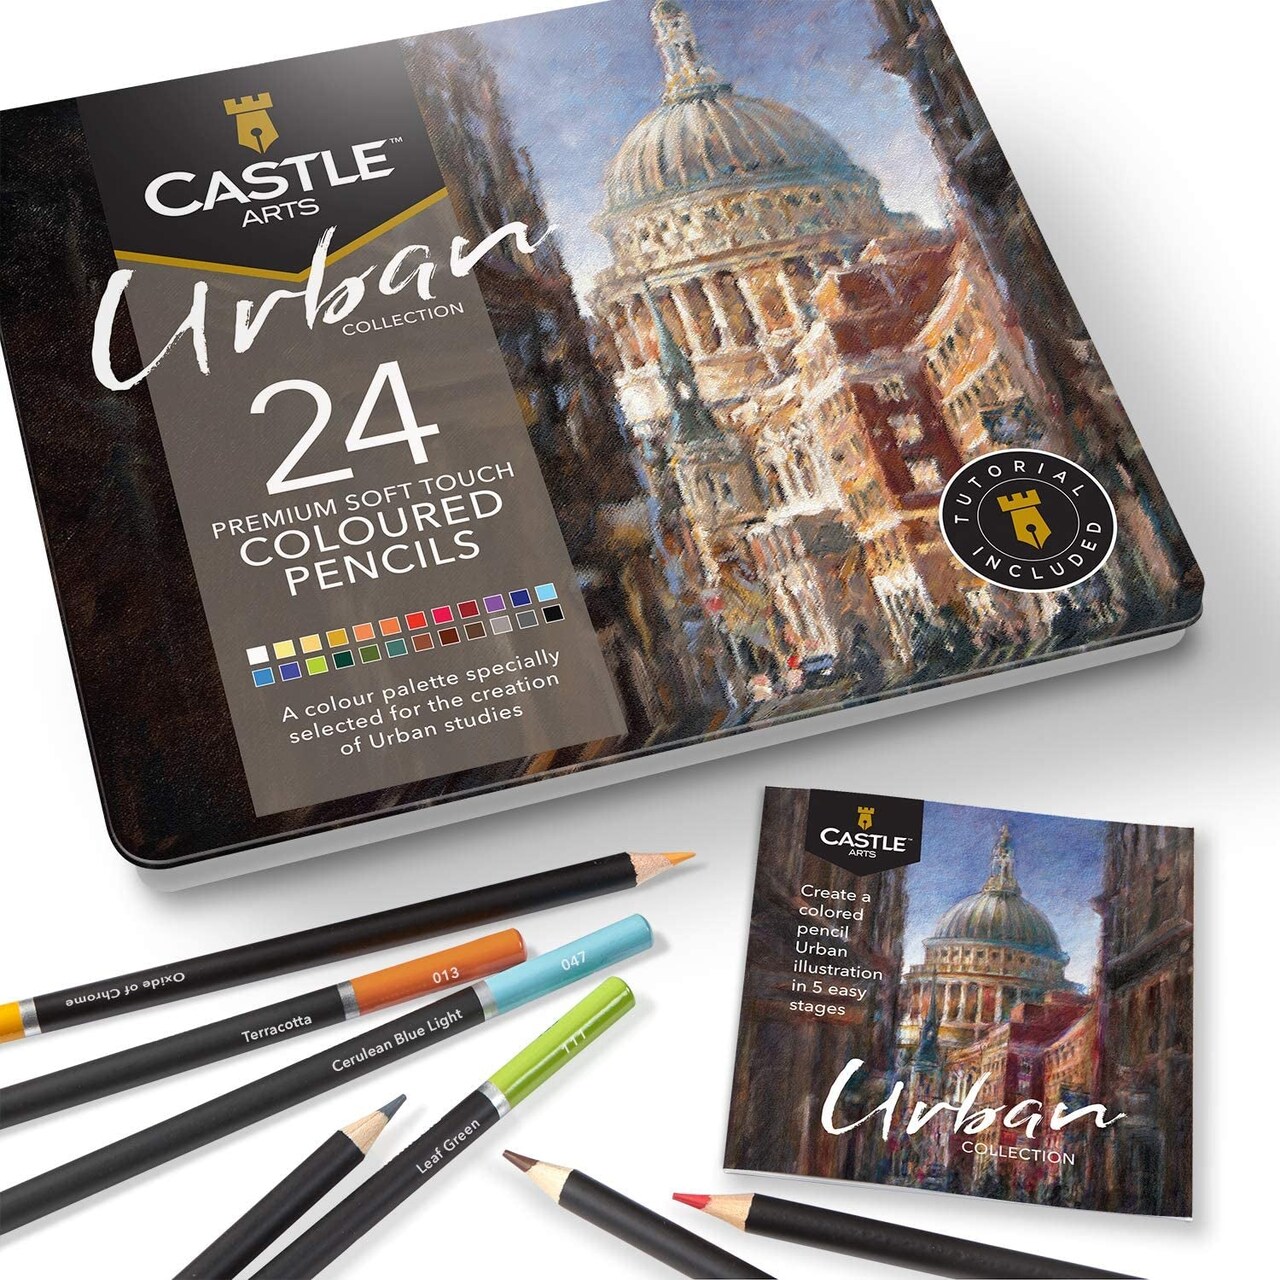 Castle Arts Themed 24 Colored Pencil Set in Tin Box, Perfect Colors for  'Botanical' Art. Featuring Quality, Smooth Colored Cores, Superior Blending  & Layering Performance for Great Results